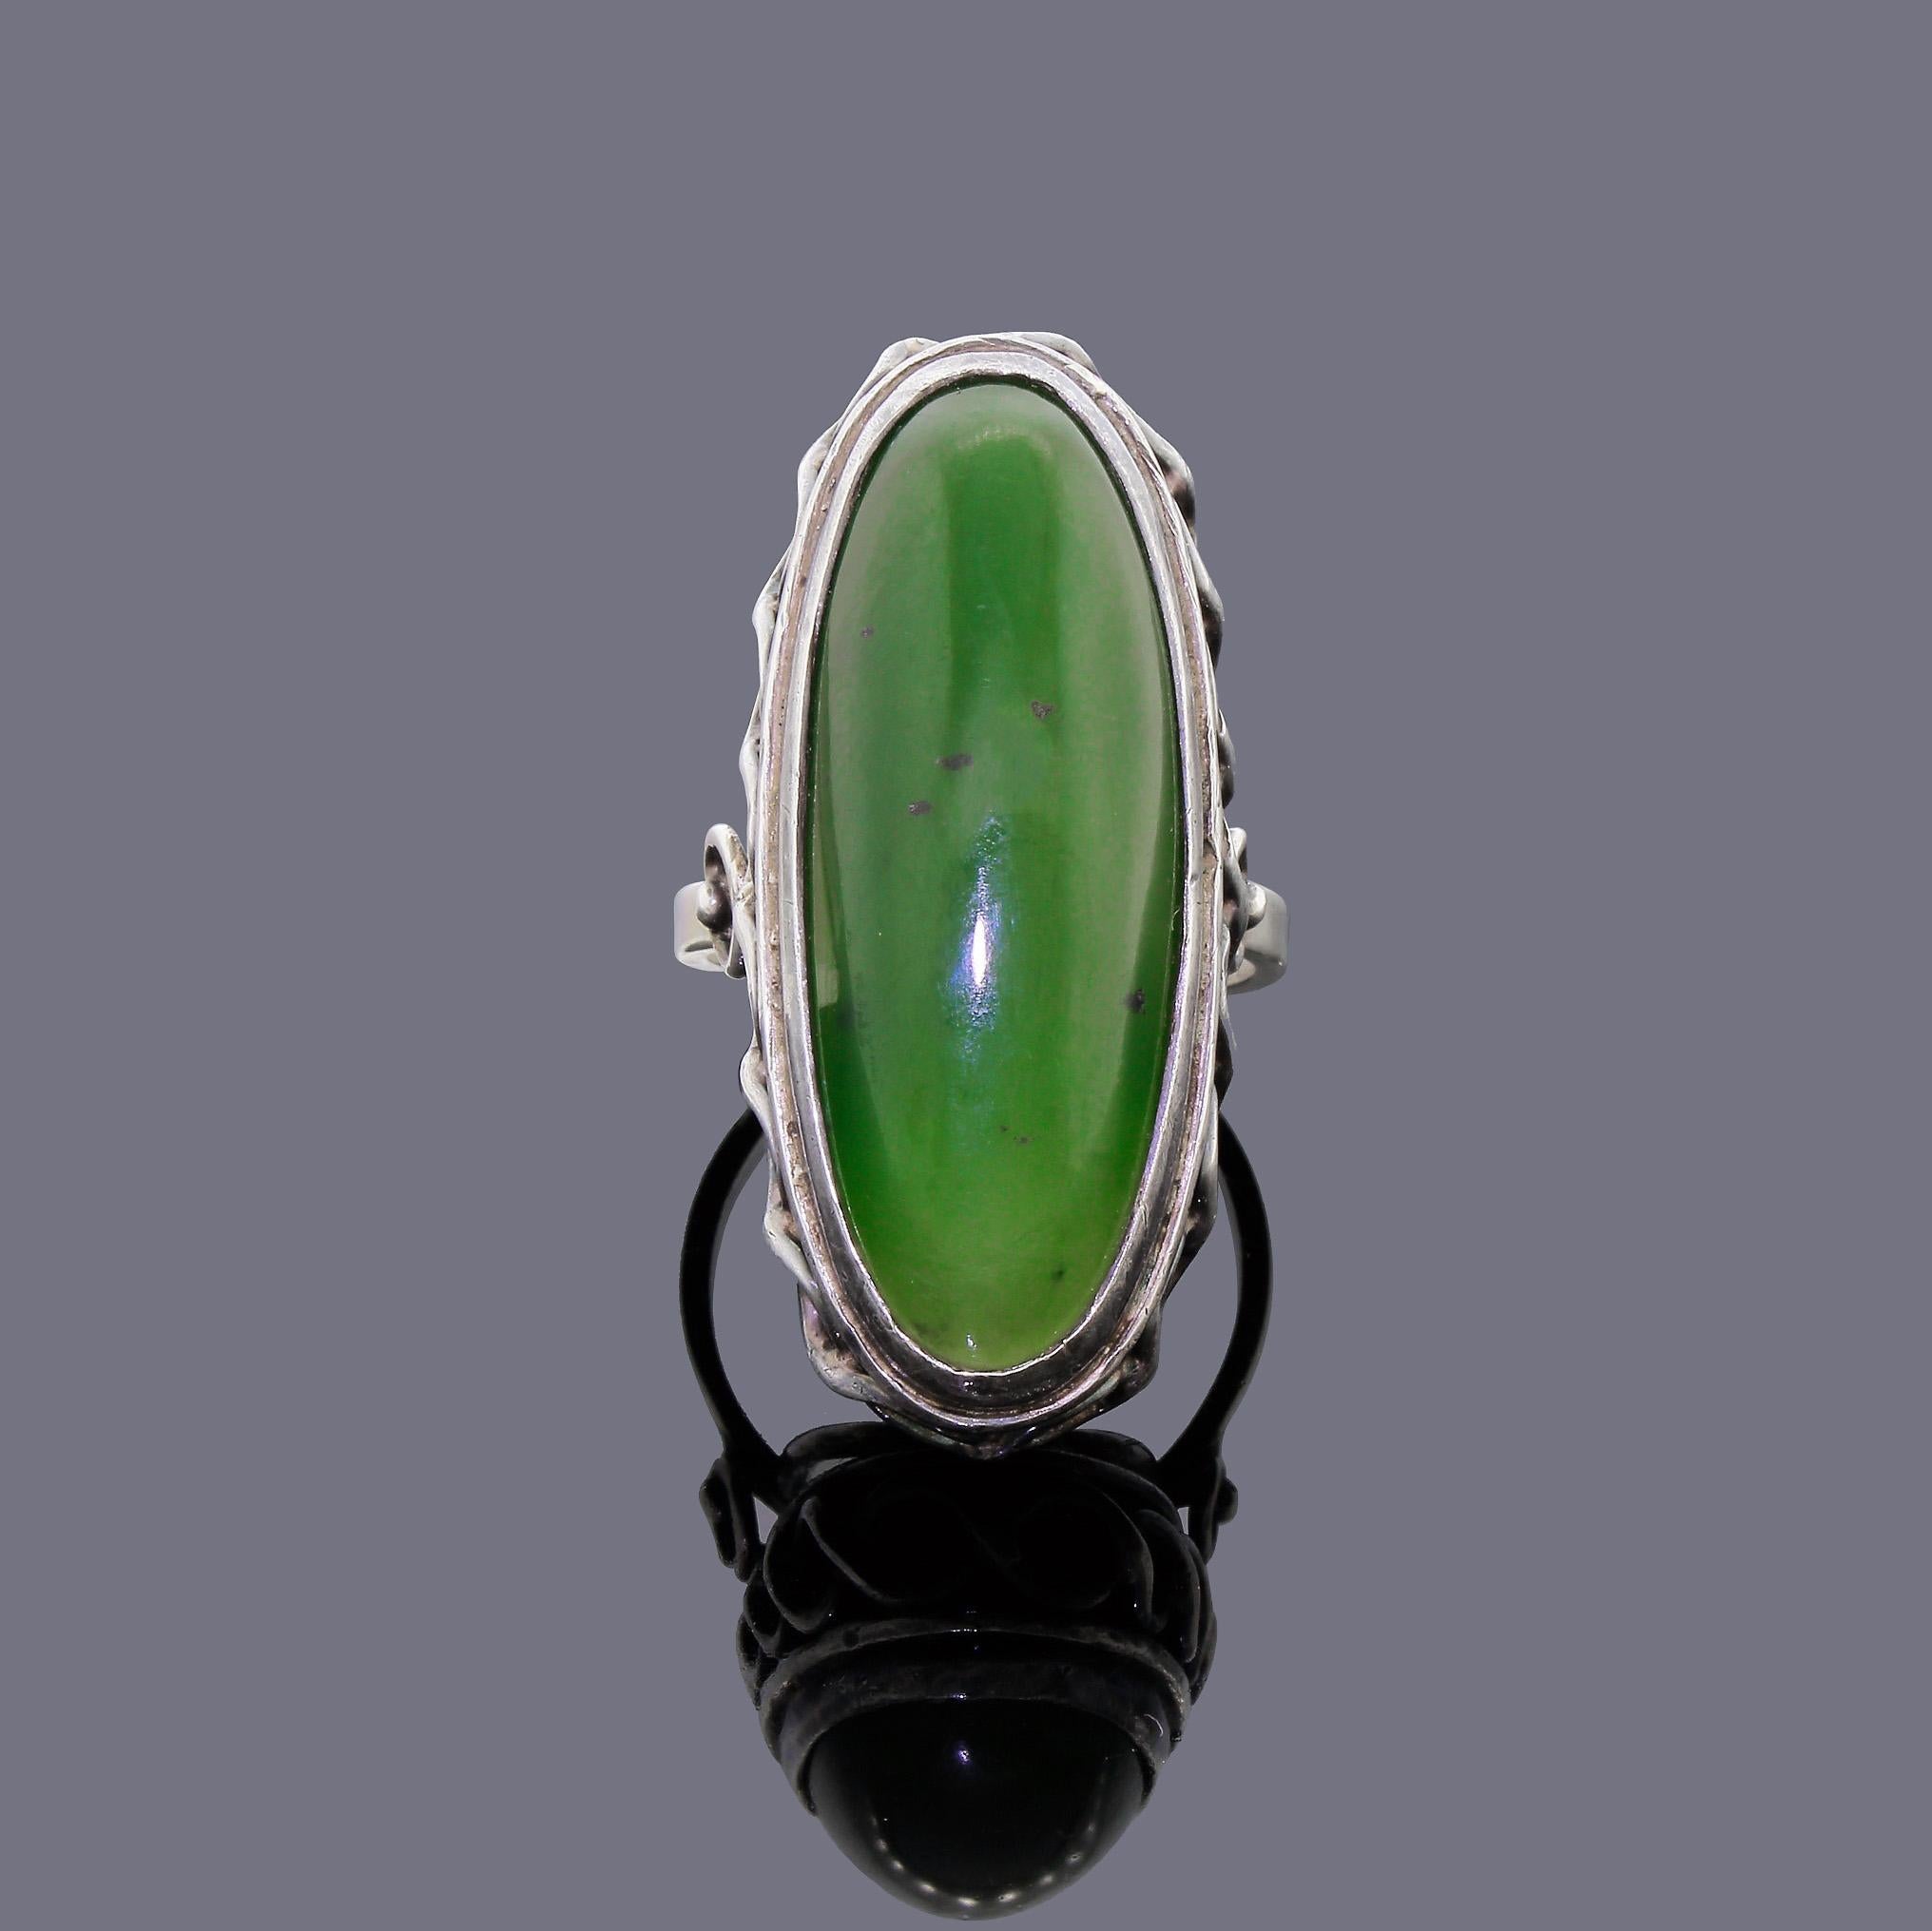 Beautiful and unique vintage Polish silver ring from the 1930s. Featuring a stunning deep apple-green nephrite jade stone which has absolutely no chips or cracks. The top of the cabochon is smooth like silk and well encased in silver for